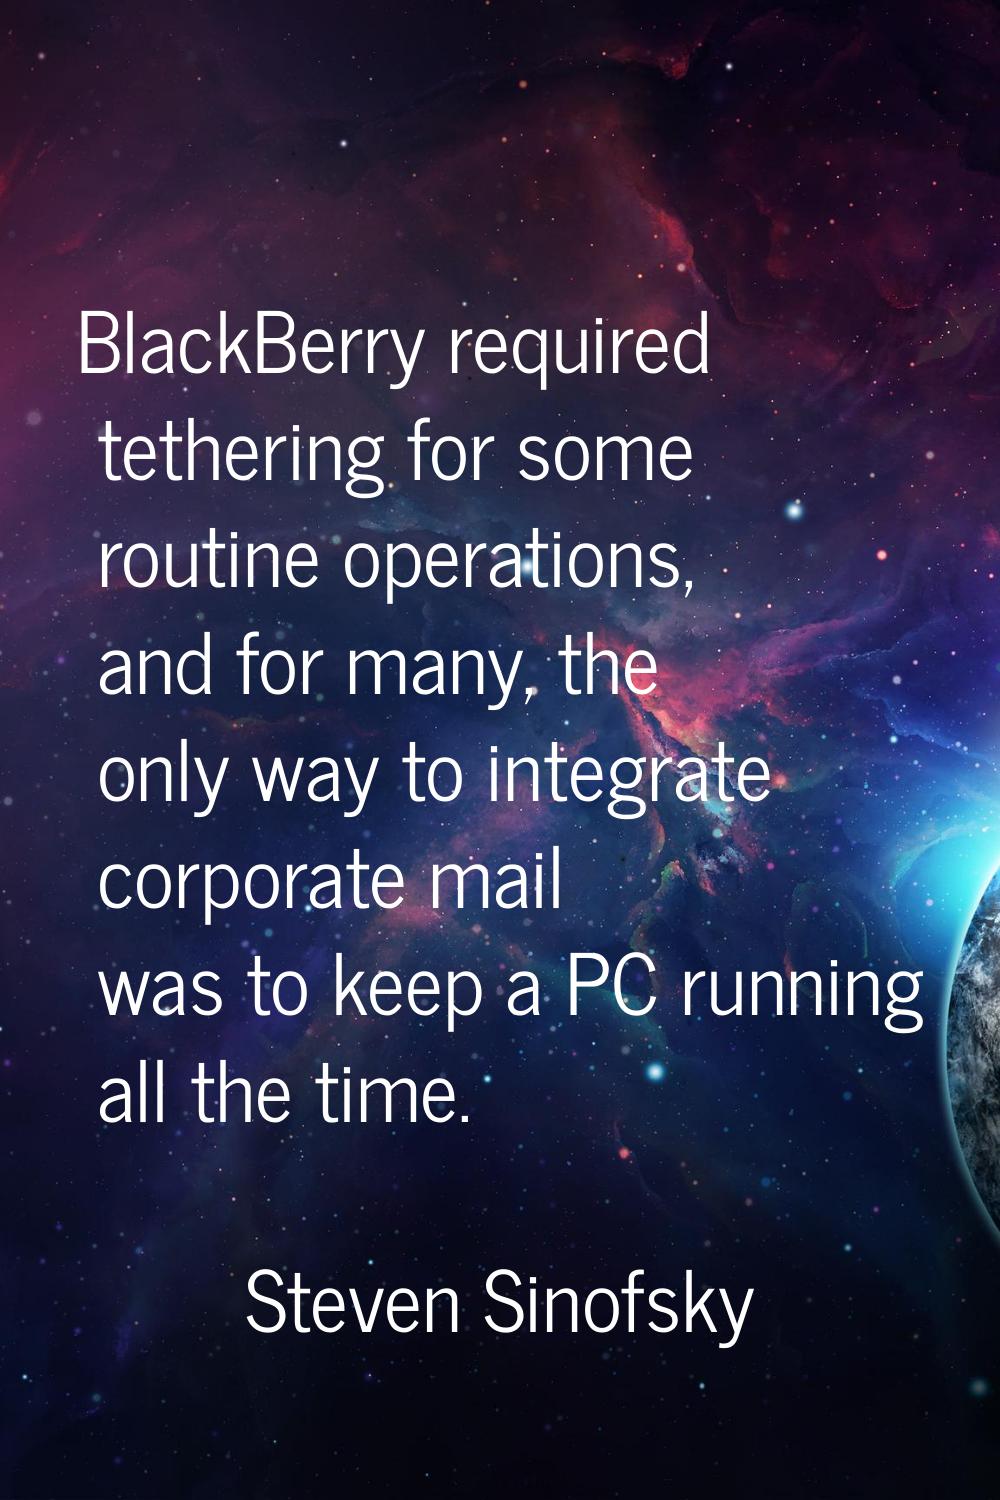 BlackBerry required tethering for some routine operations, and for many, the only way to integrate 